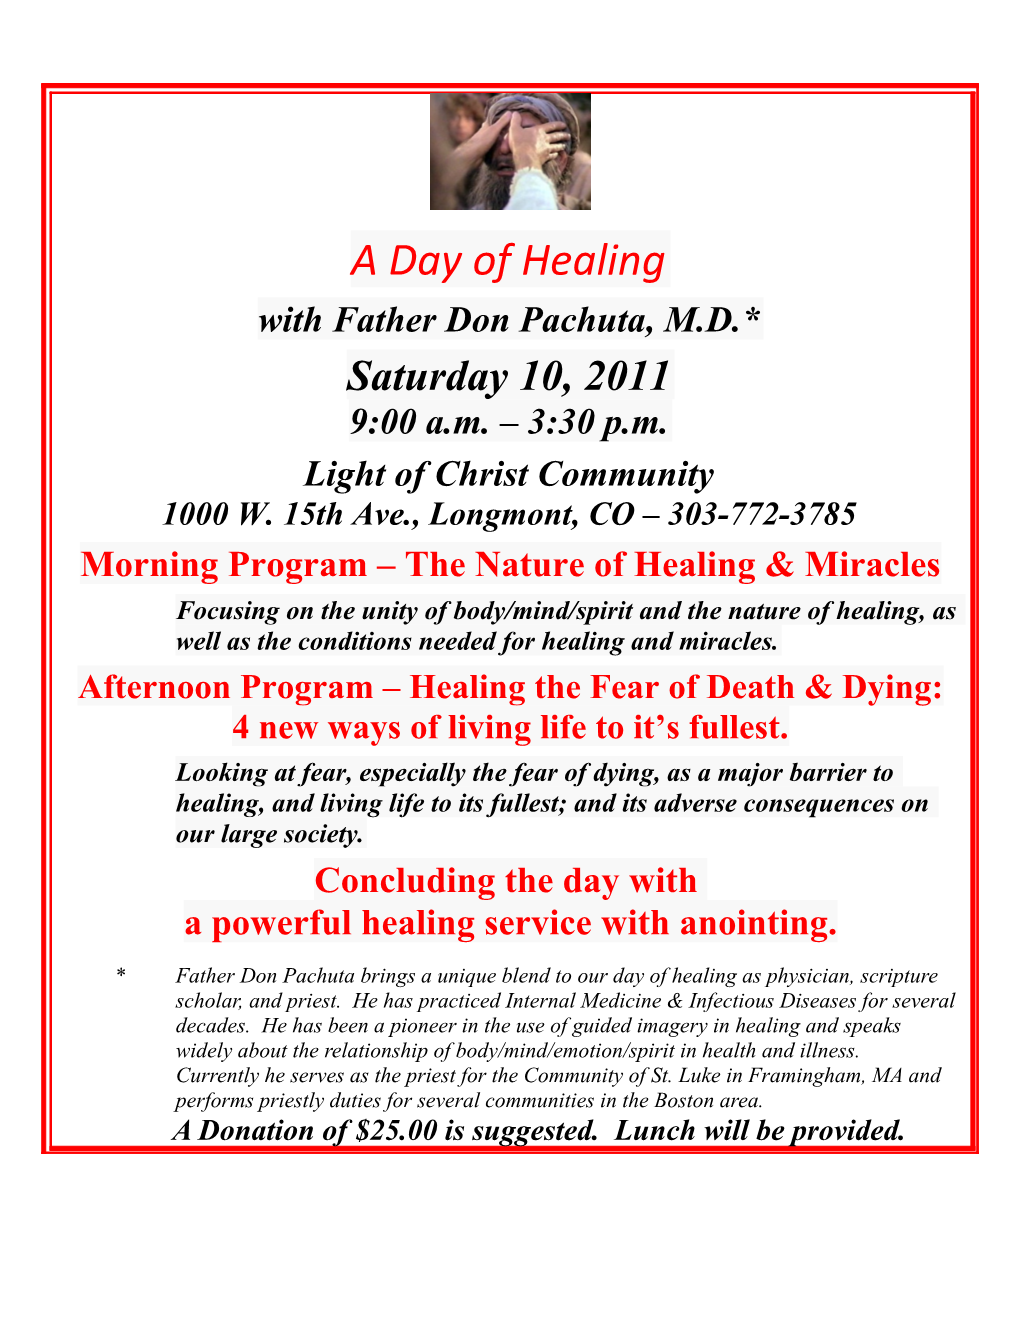 Light of Christ Community 1000 W. 15Th Avenue Longmont, CO 80501 a Member of the Ecumenical